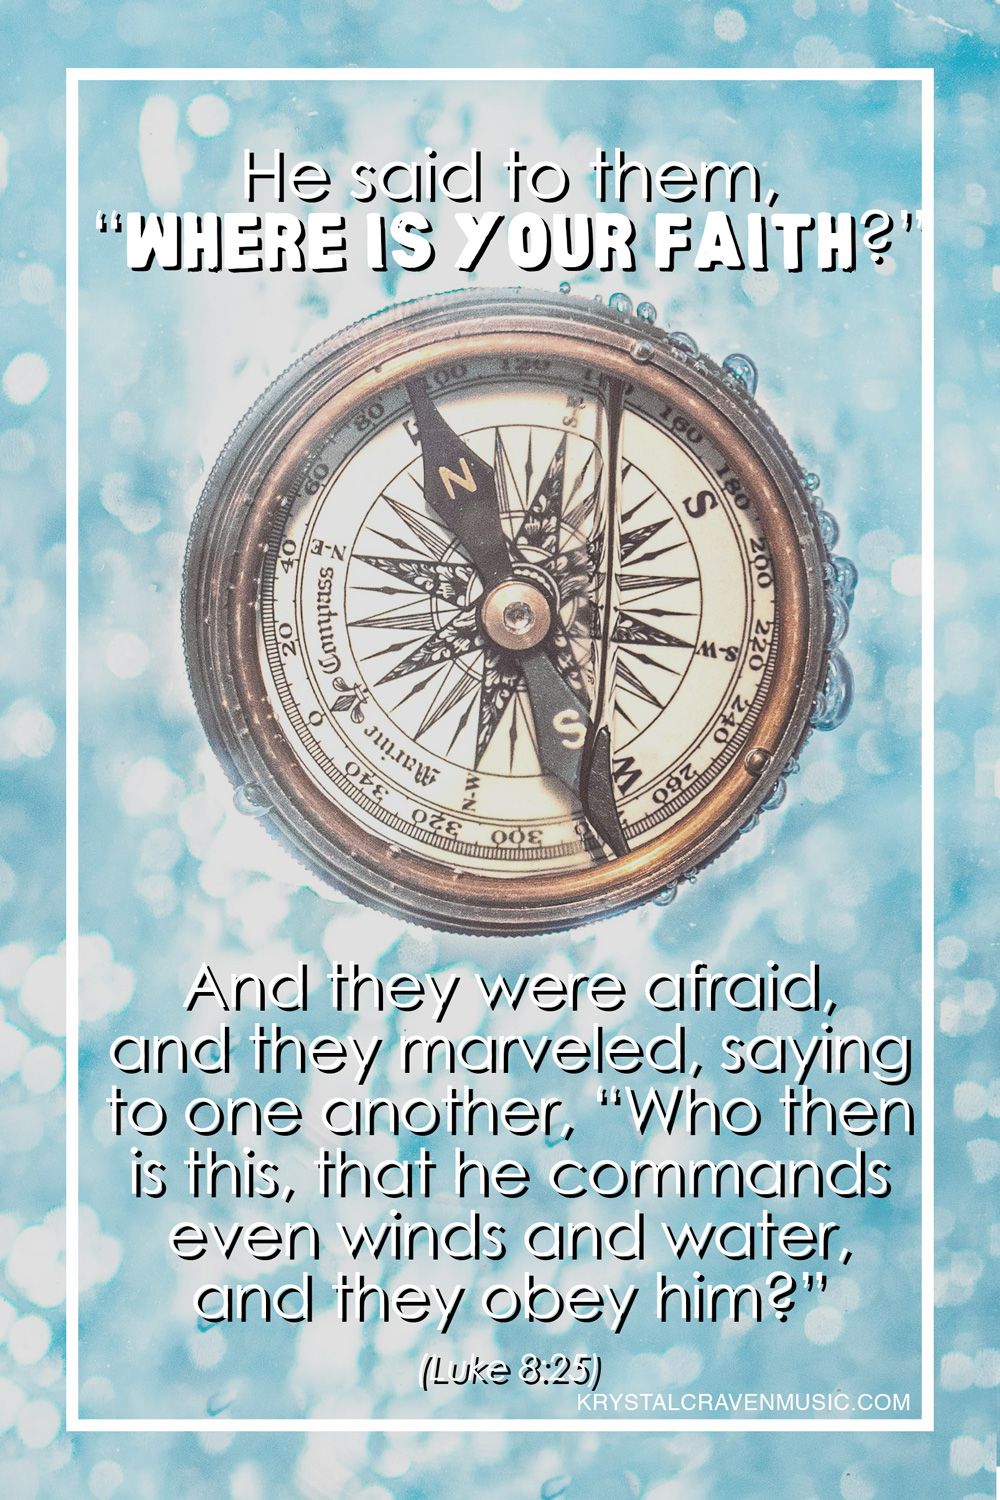 The text of Luke 8:25, "He said to them, "Where is your faith?" And they were afraid, and they marveled, saying to one another, "Who then is this, that he commands even winds and water, and they obey him?" overlaying a compass in blue water with bubbles around it.